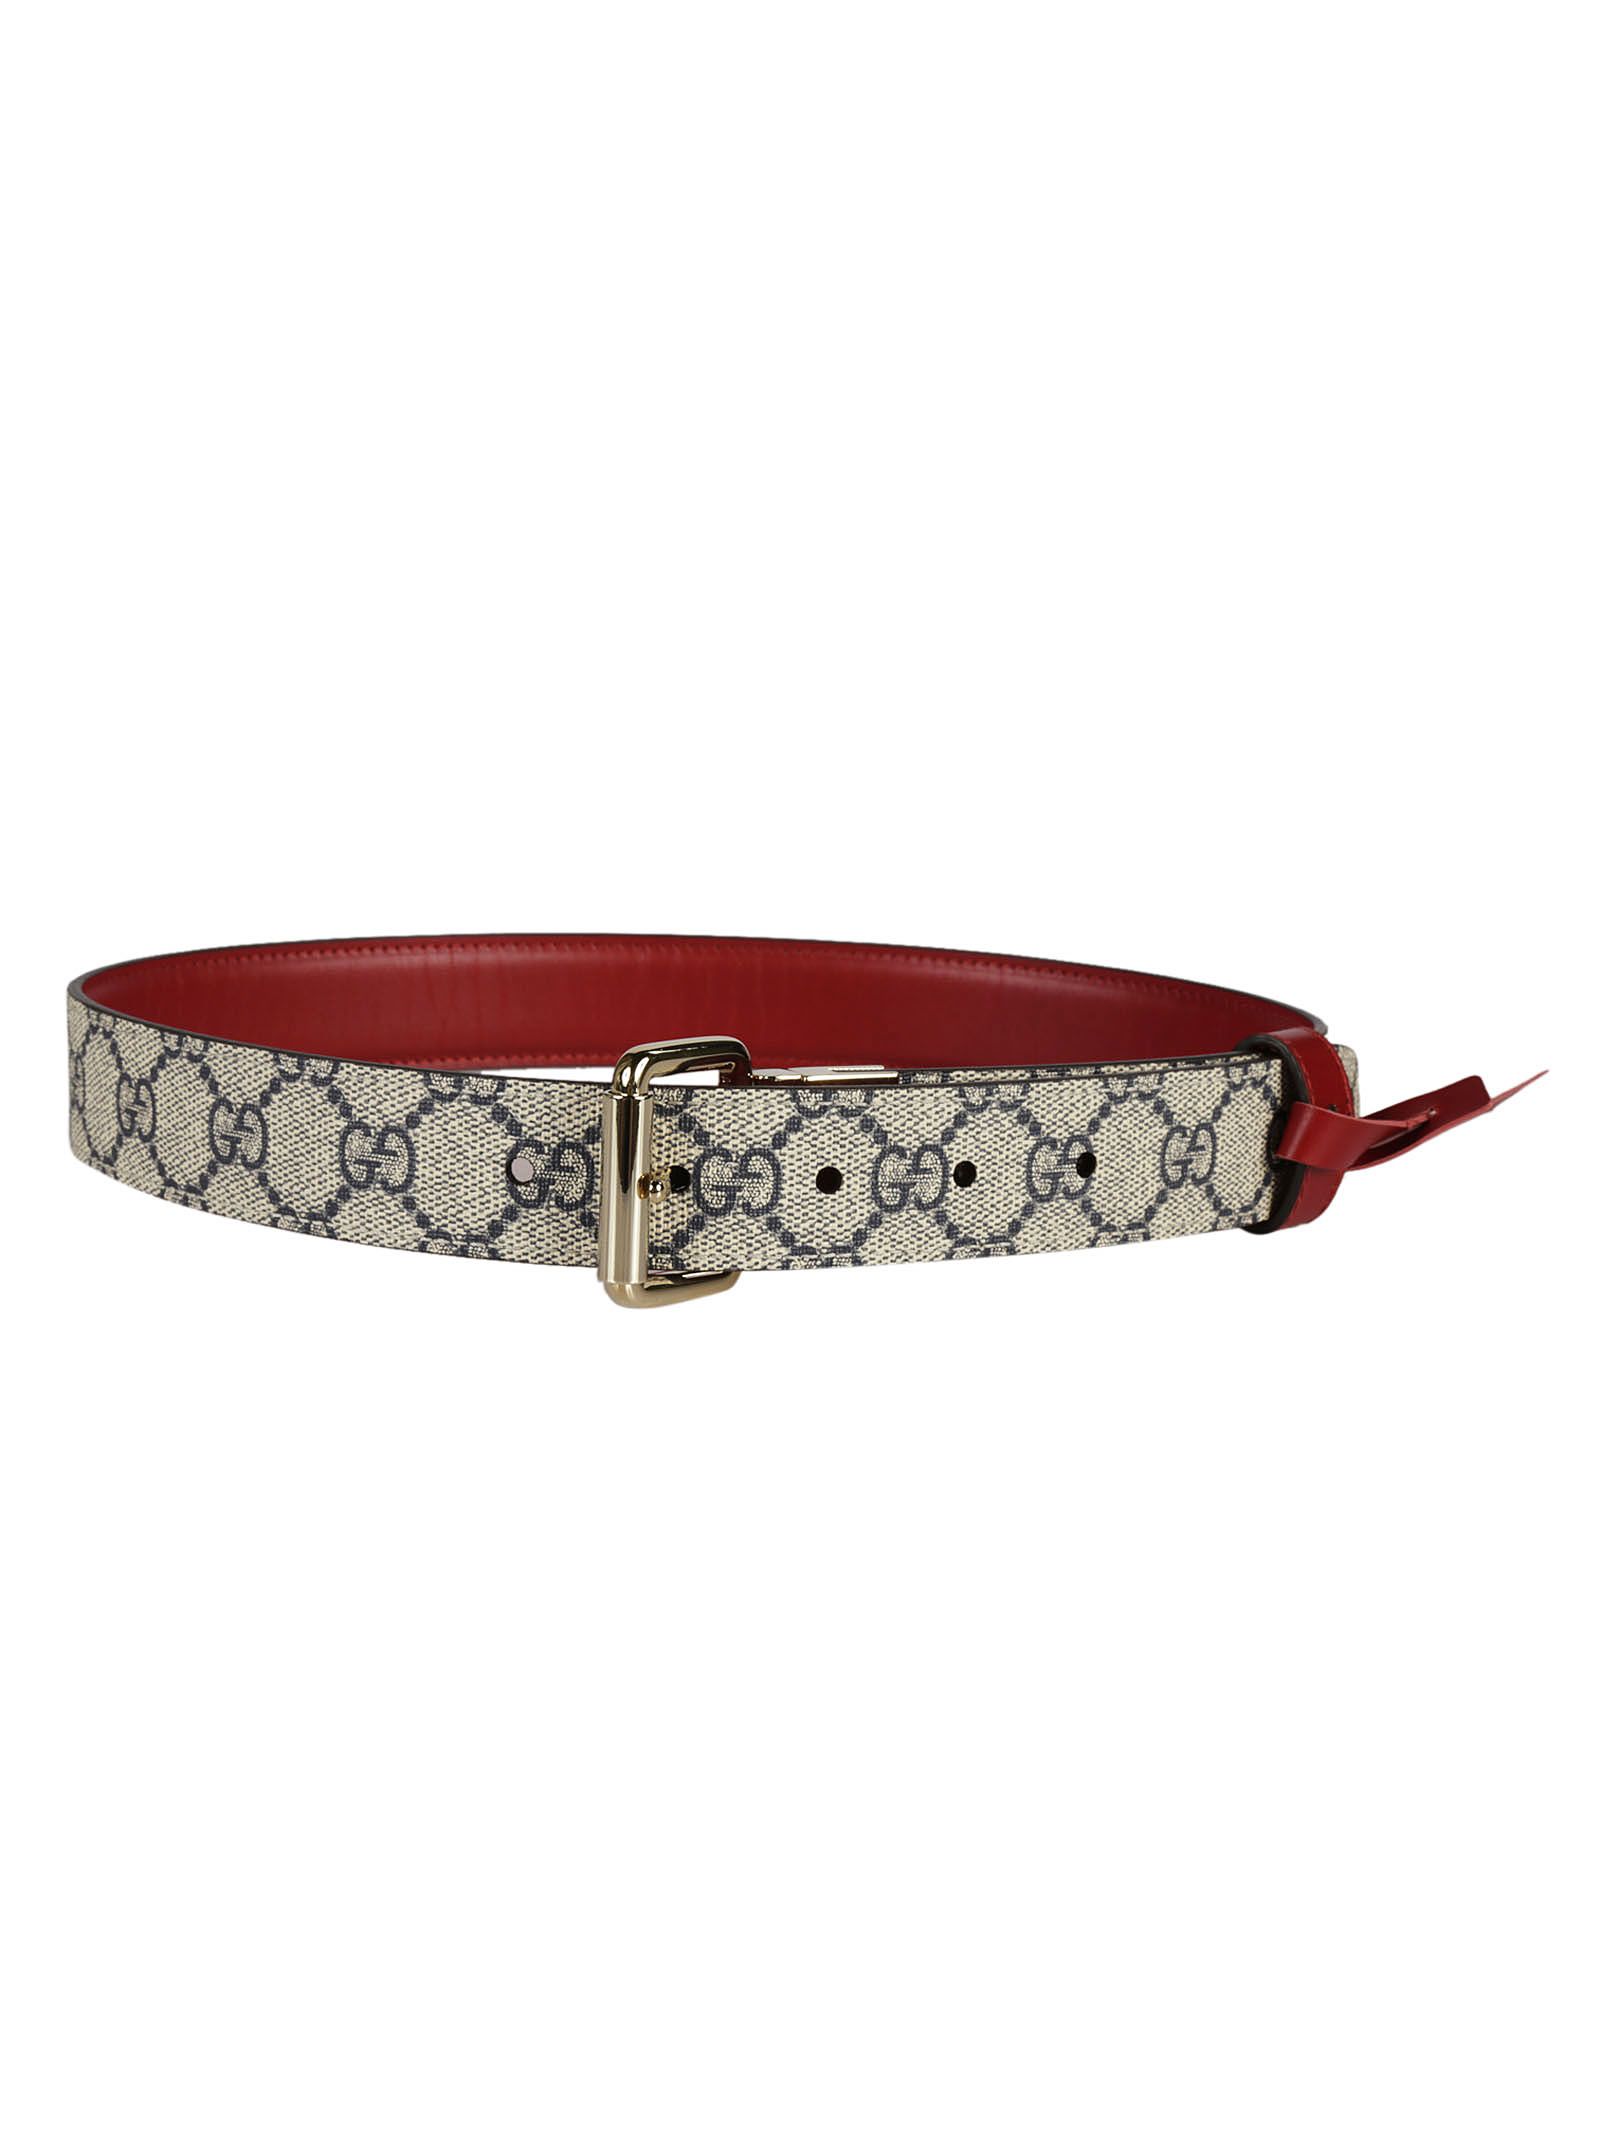 Gucci - Gucci Reversible Leather and GG Supreme Belt - Beige/Red, Men&#39;s Belts | Italist